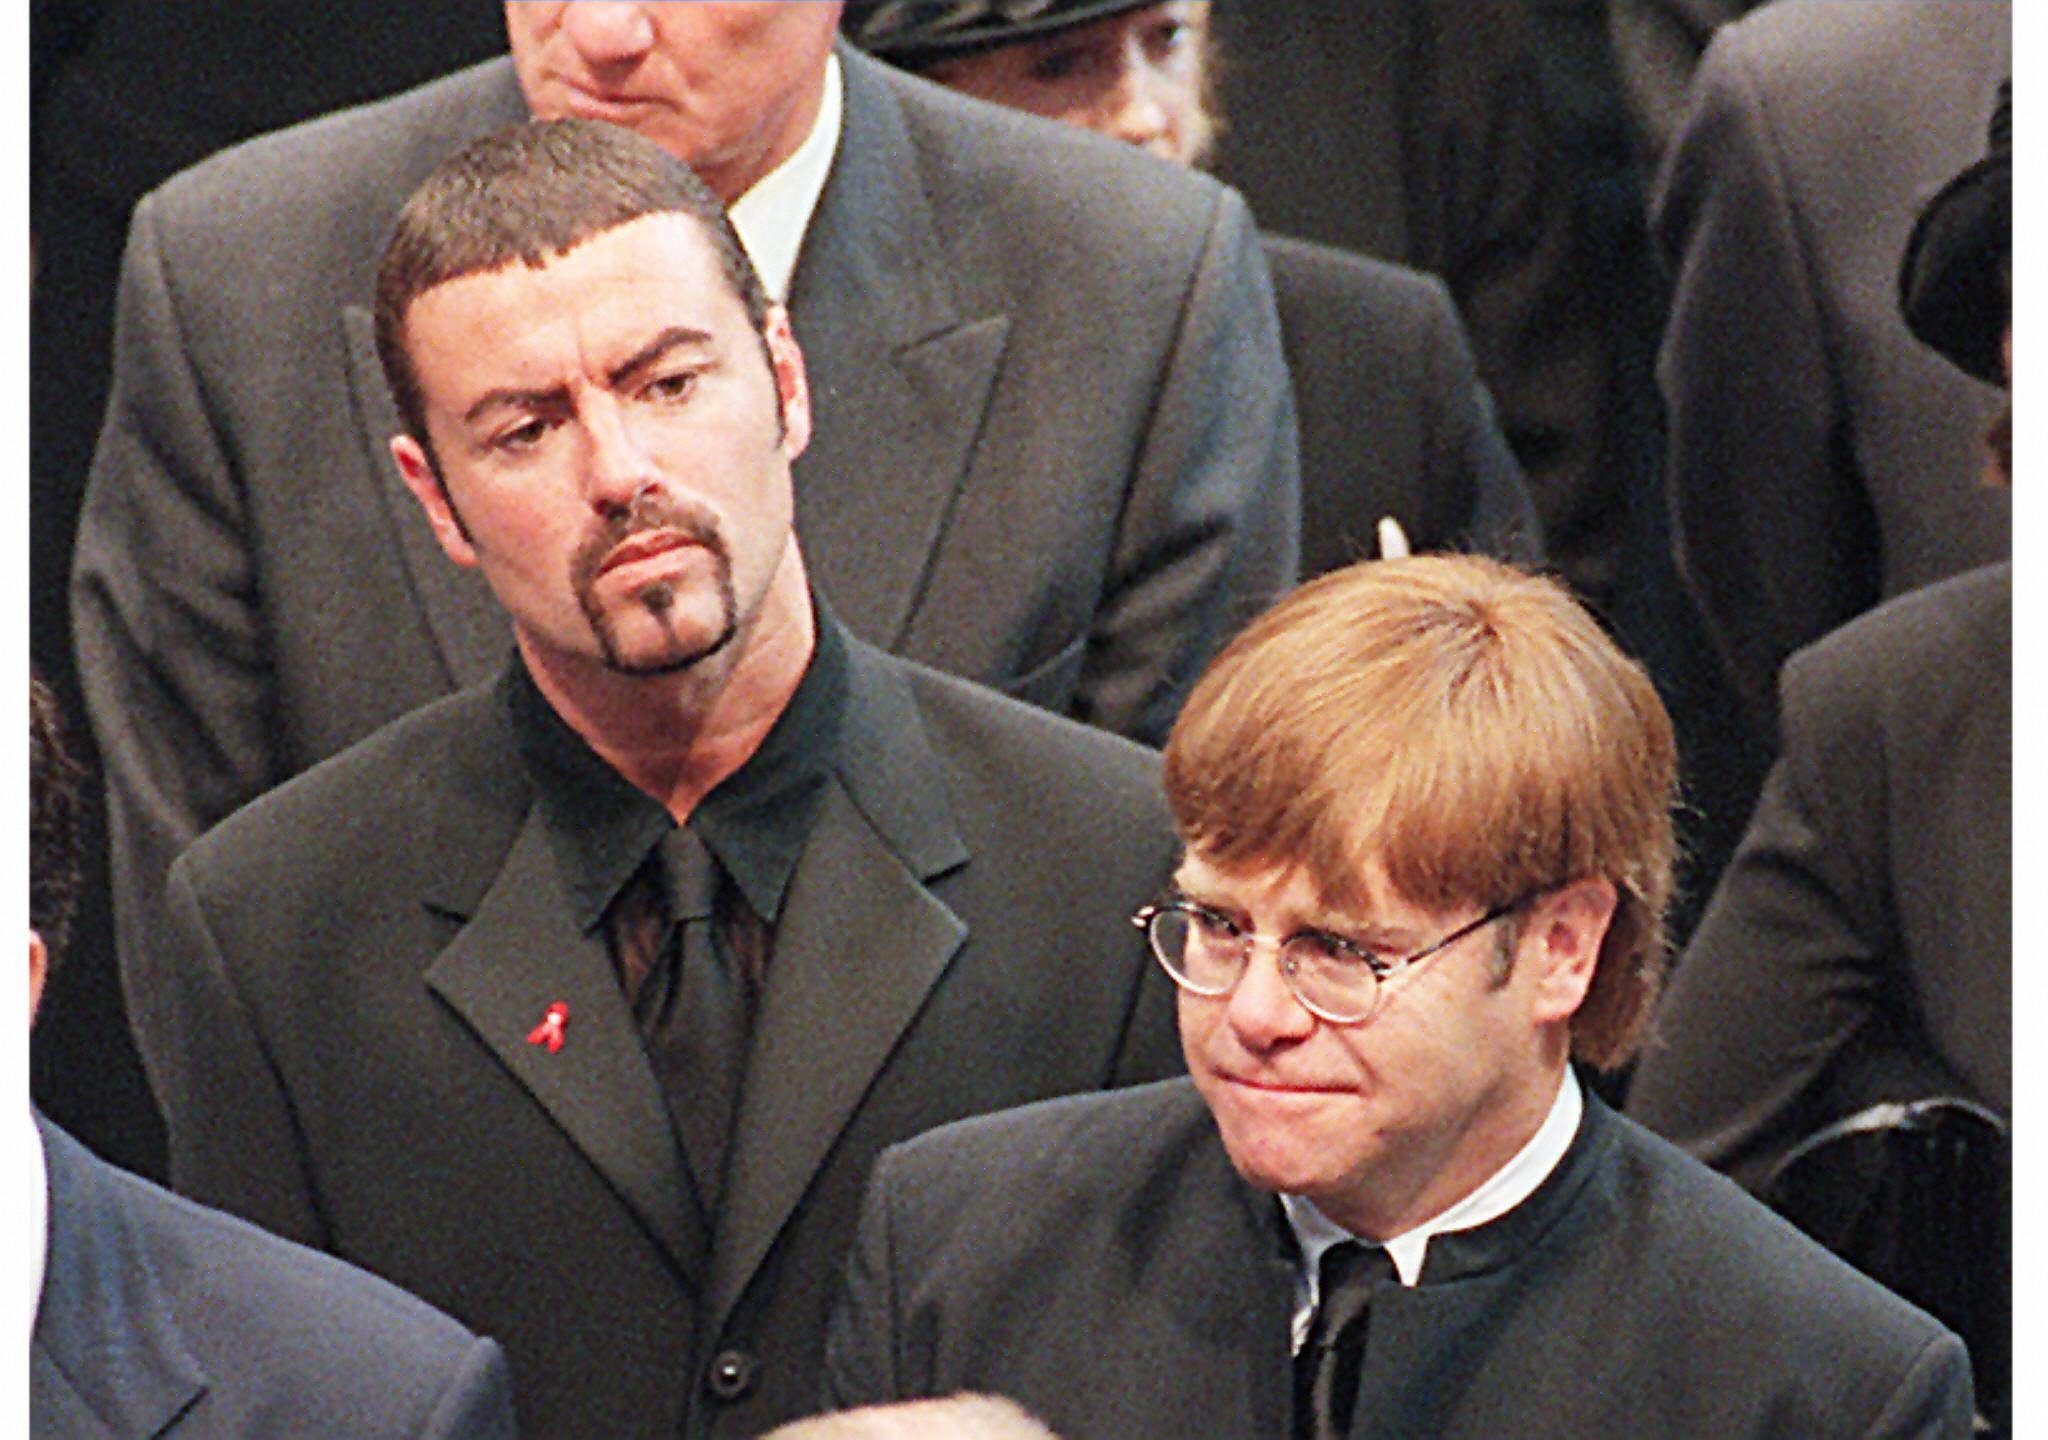 George Michael and Elton John at Westminster Abbey for Princess Diana's funeral